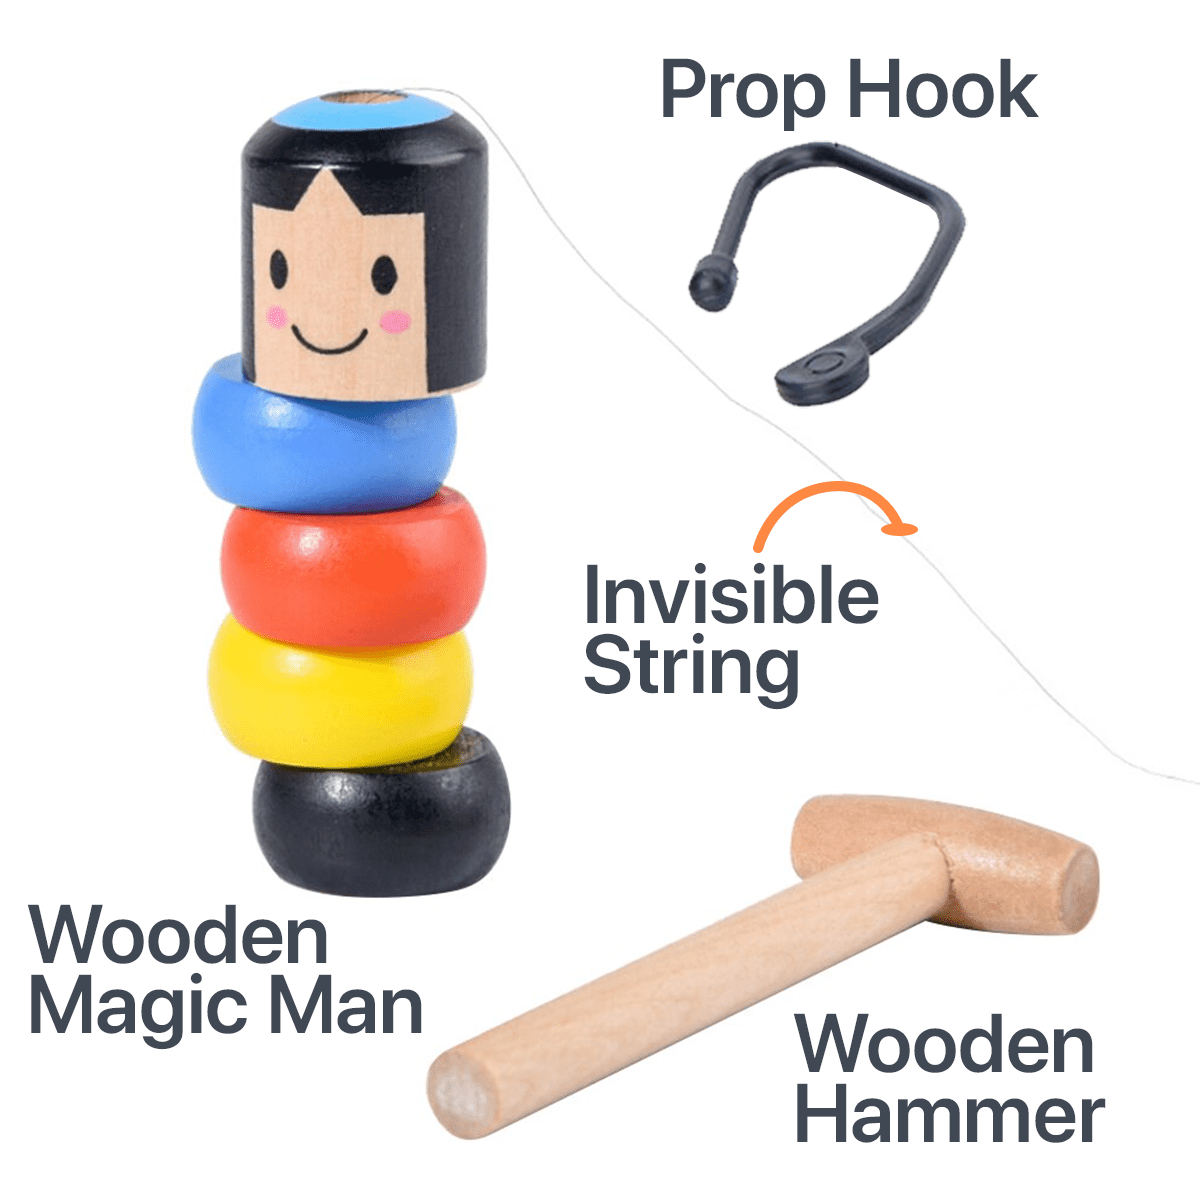 Adult and So On Reliable Lotuny Wooden Man Magic Toy,Fun and Unique Magic with Traditional Japanese Toys for Children